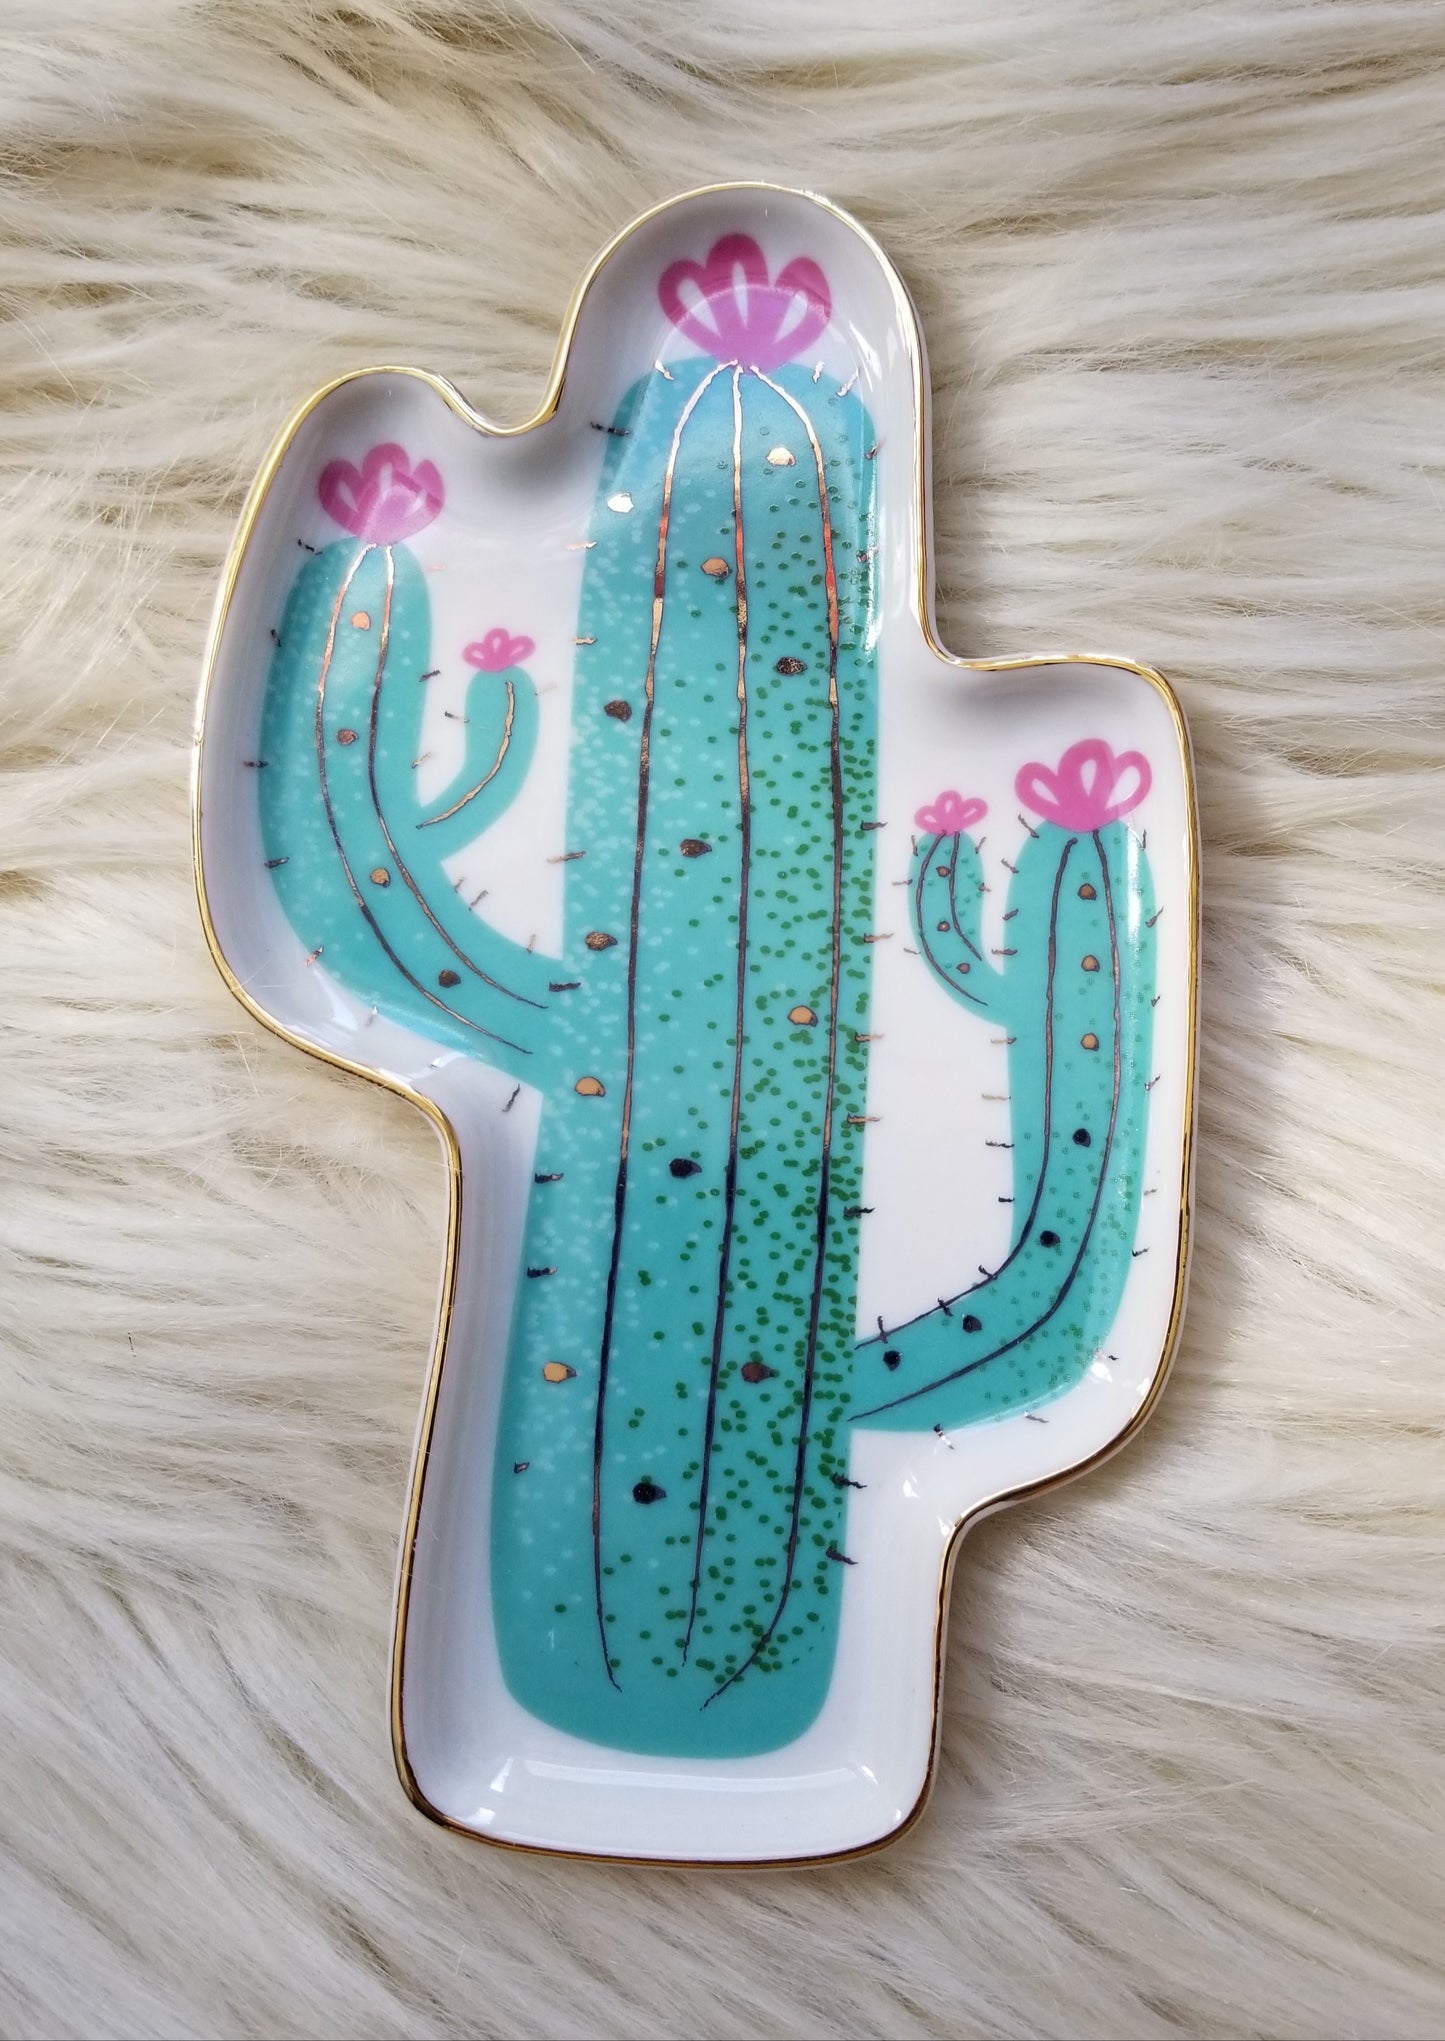 Pretty Cactus Ring Tray - #wholesaleacc, cactua, cactus, cactus print, cactus prints, cactusprint, ceramic, desert, gift, gift idea, gift ideas, jewelry, jewelry tray, pink, ring, southwestern, teal, teal cactus, tray, western -  - Baha Ranch Western Wear